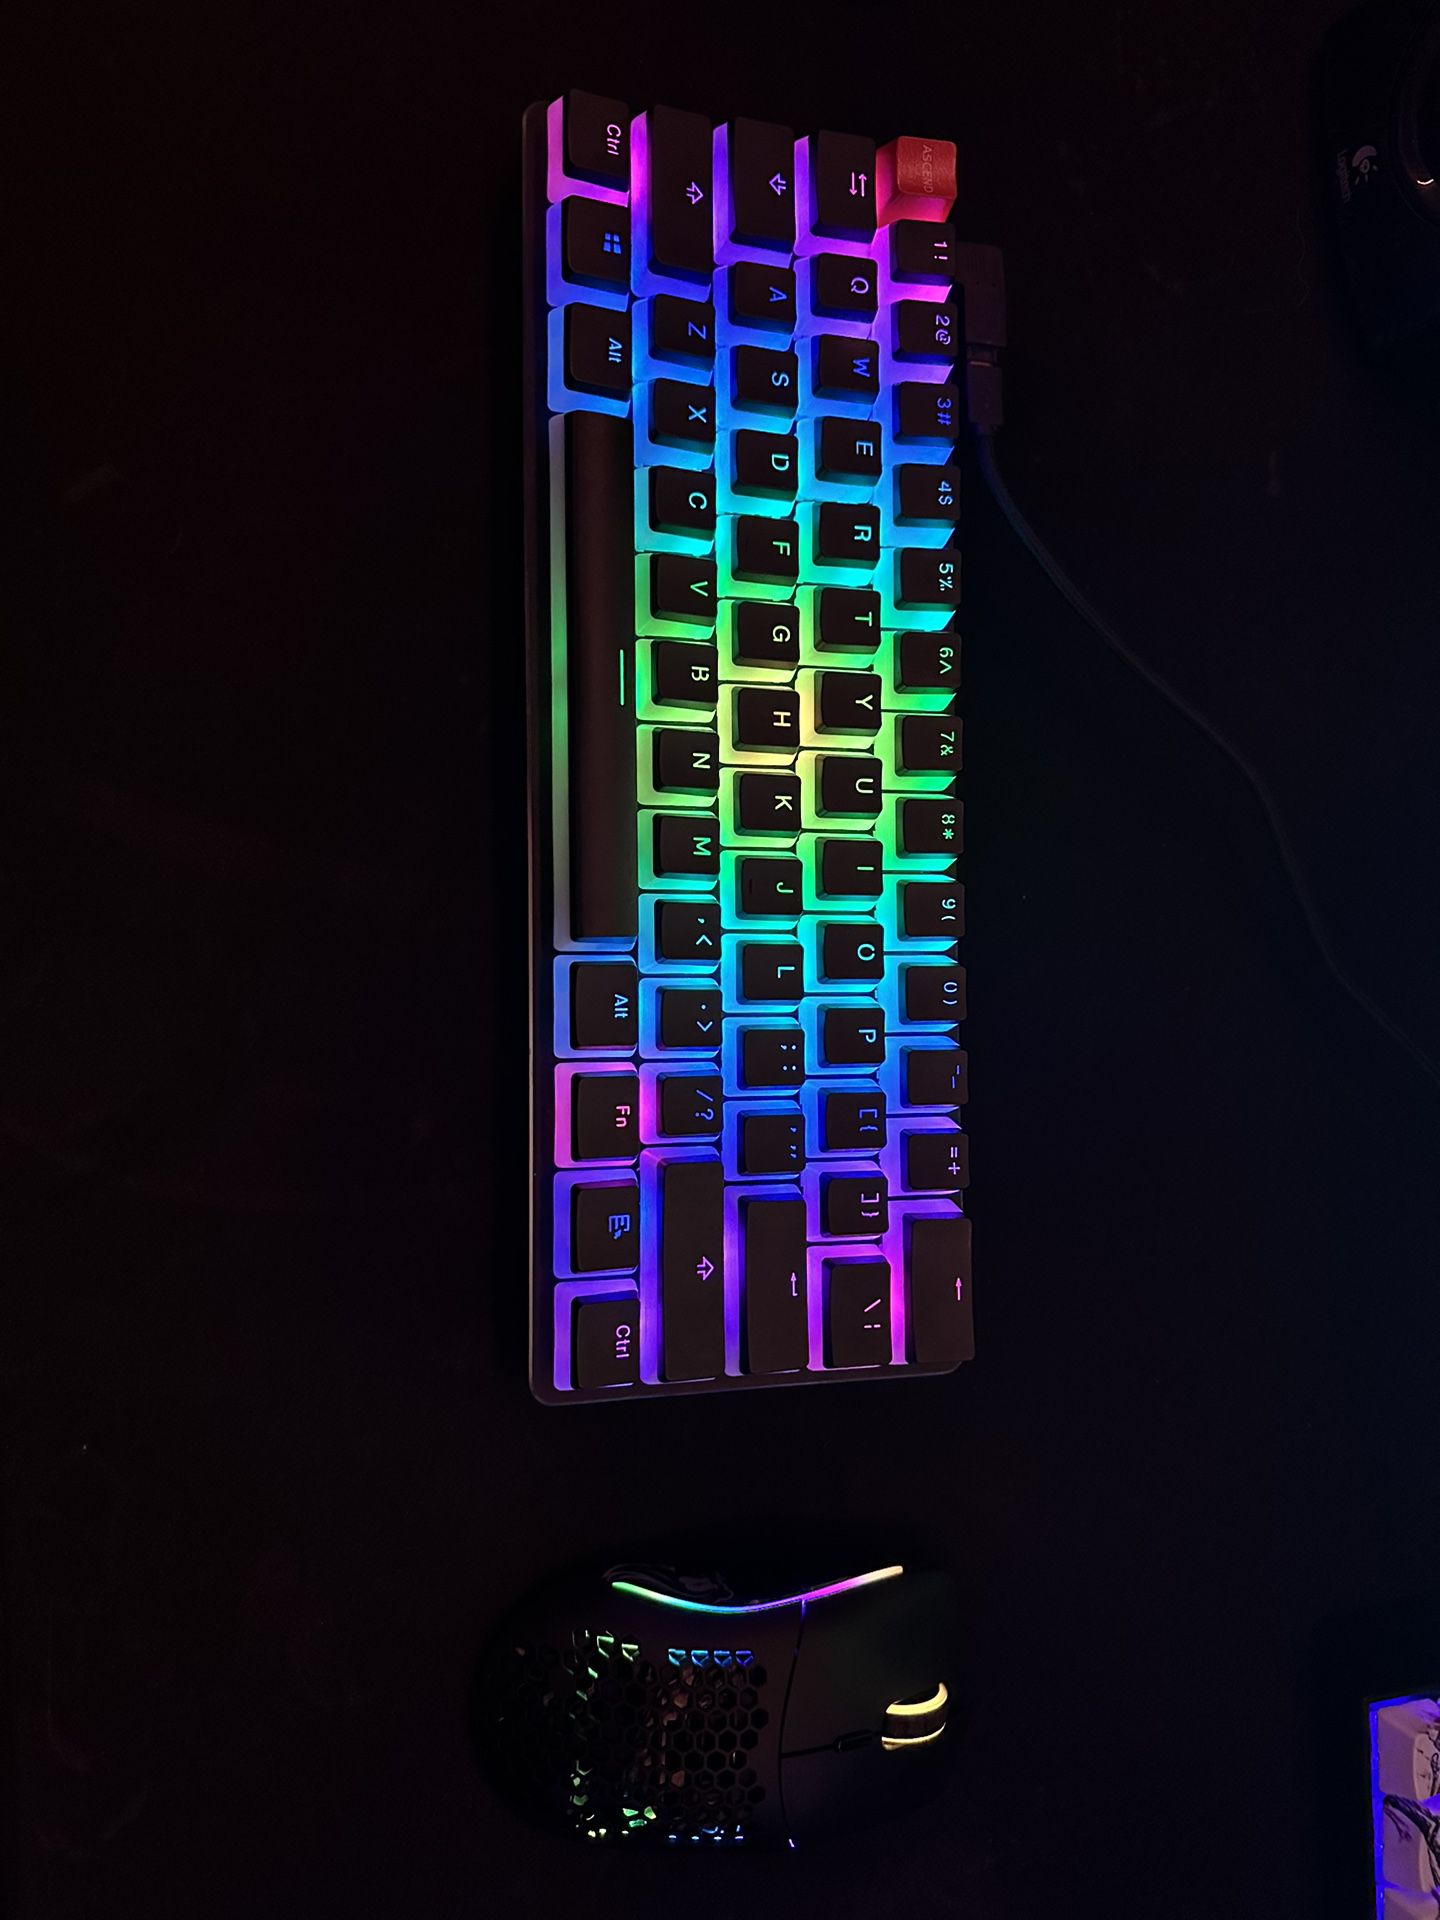 Glorious Model O- Minus Wireless Gaming Mouse and Glorious GMMK 60% Keyboard